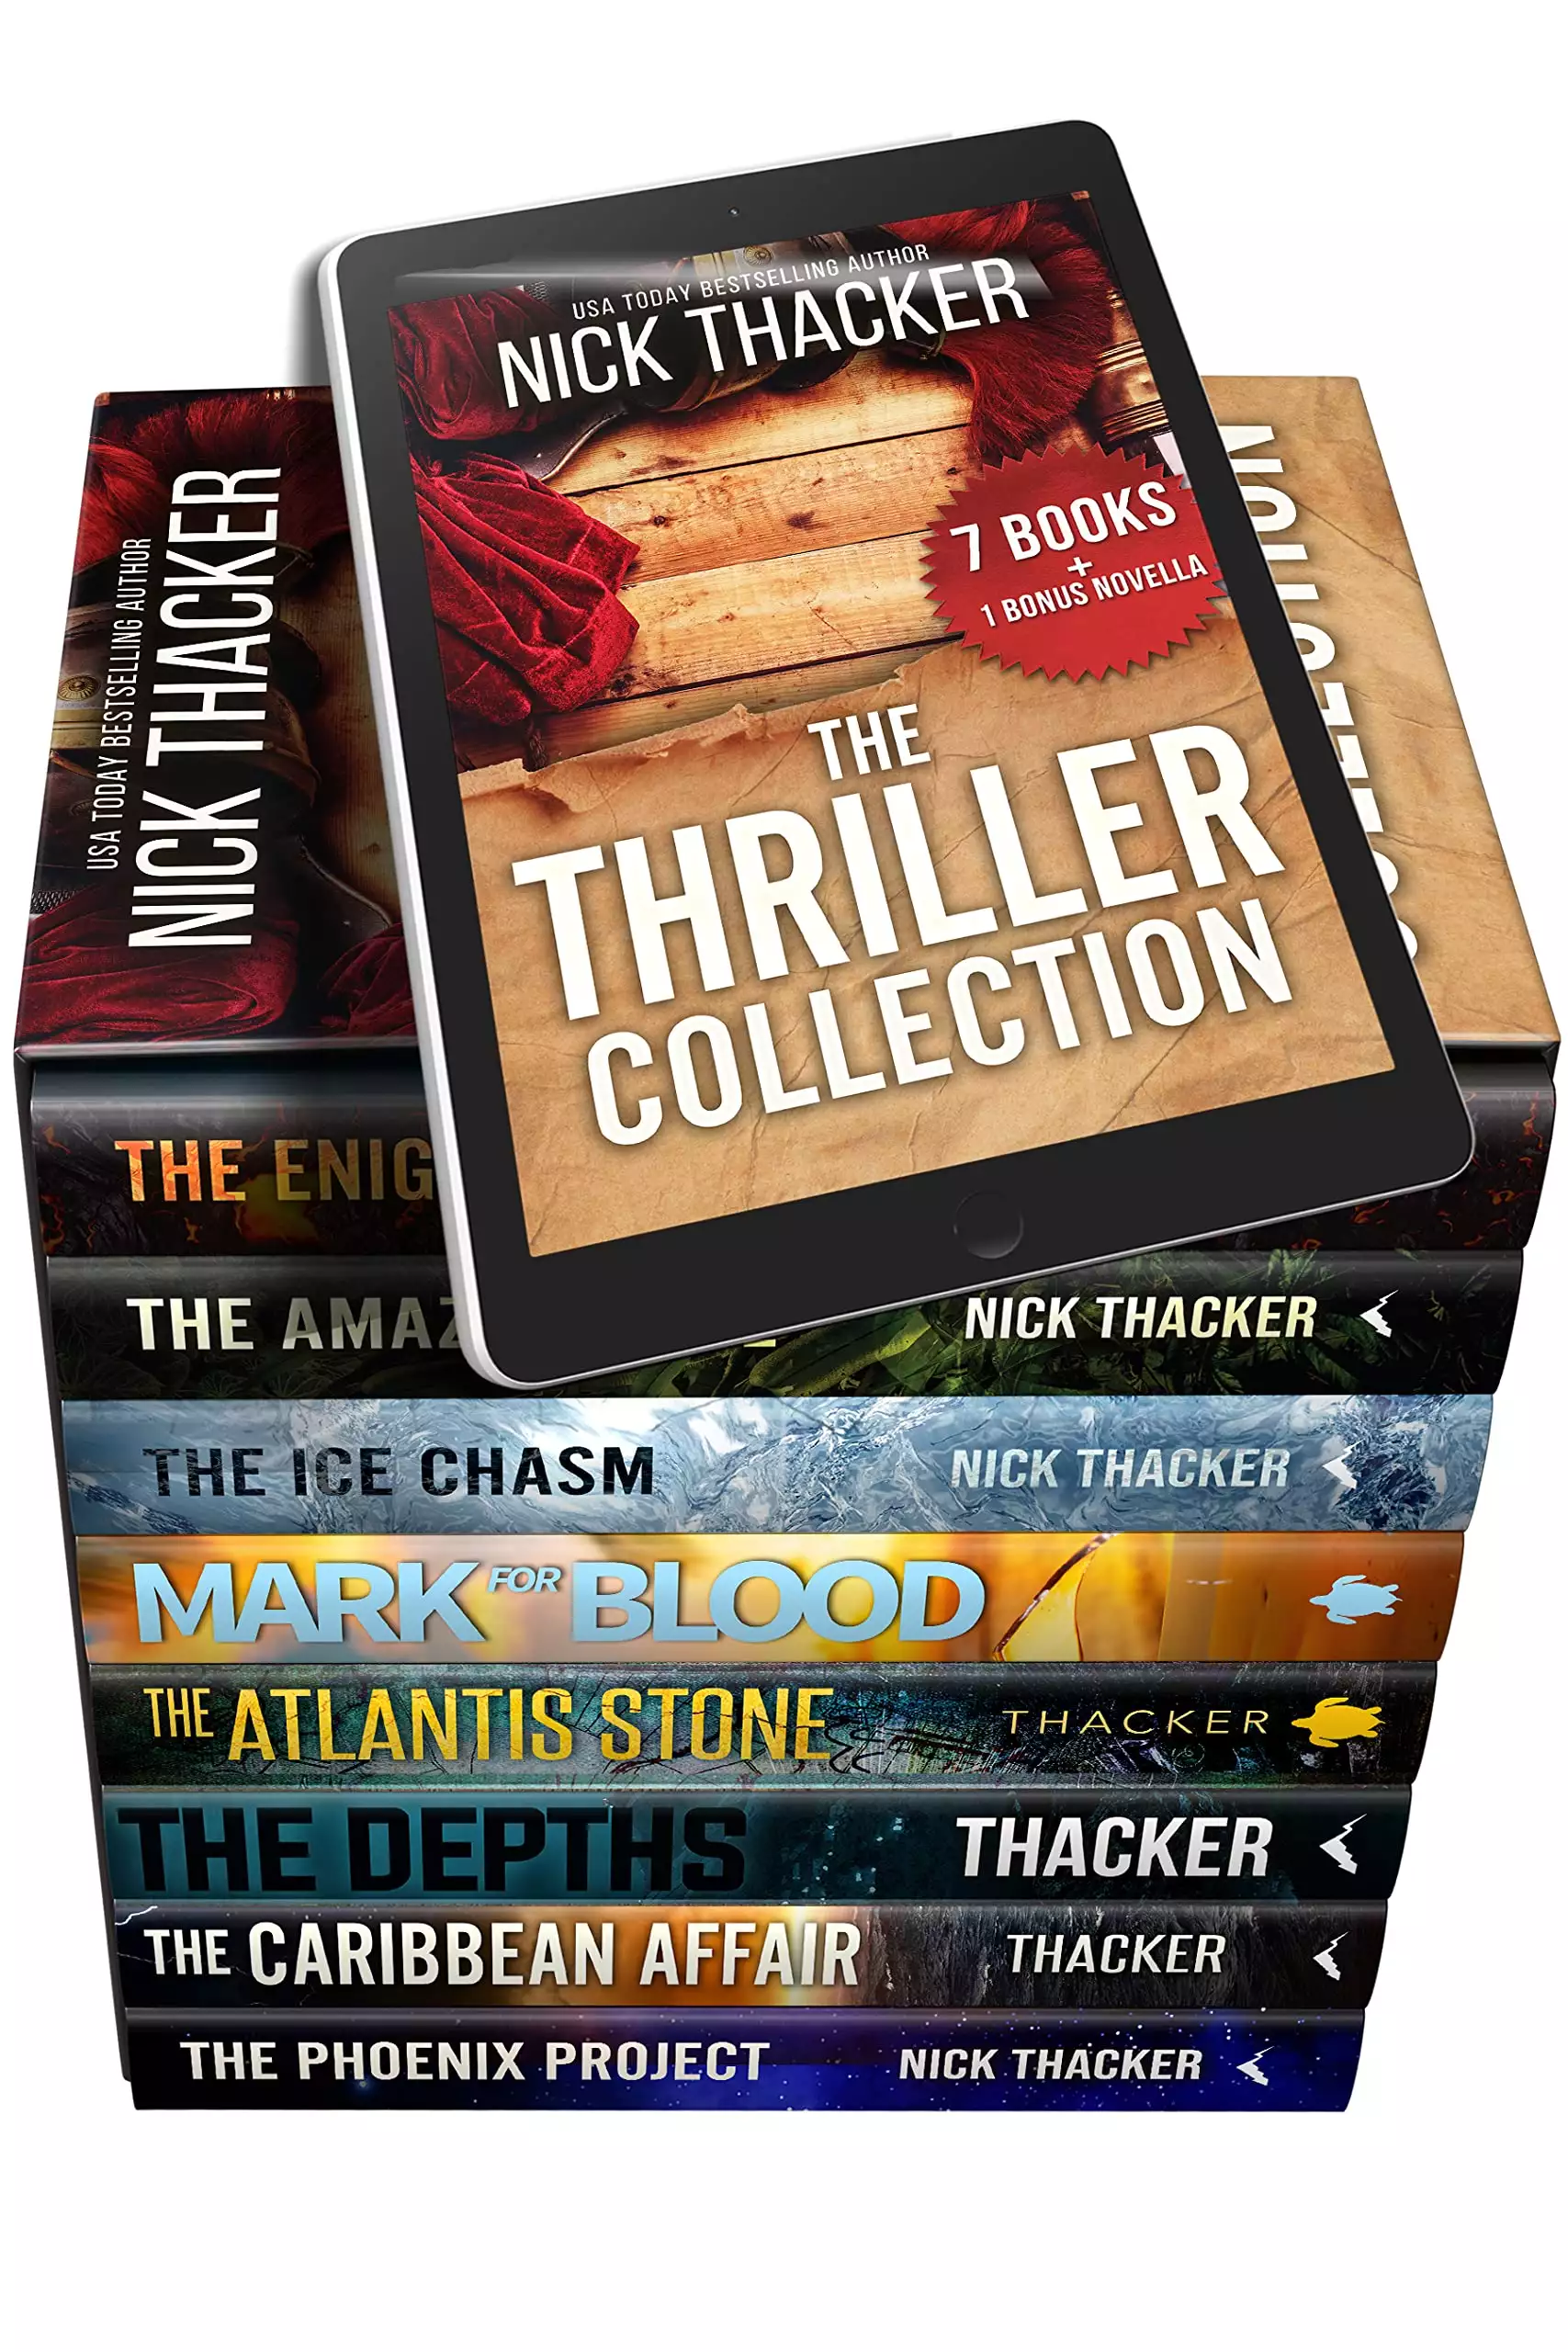 The Thriller Collection: 7 Action-Packed, Fast-Paced Thrillers